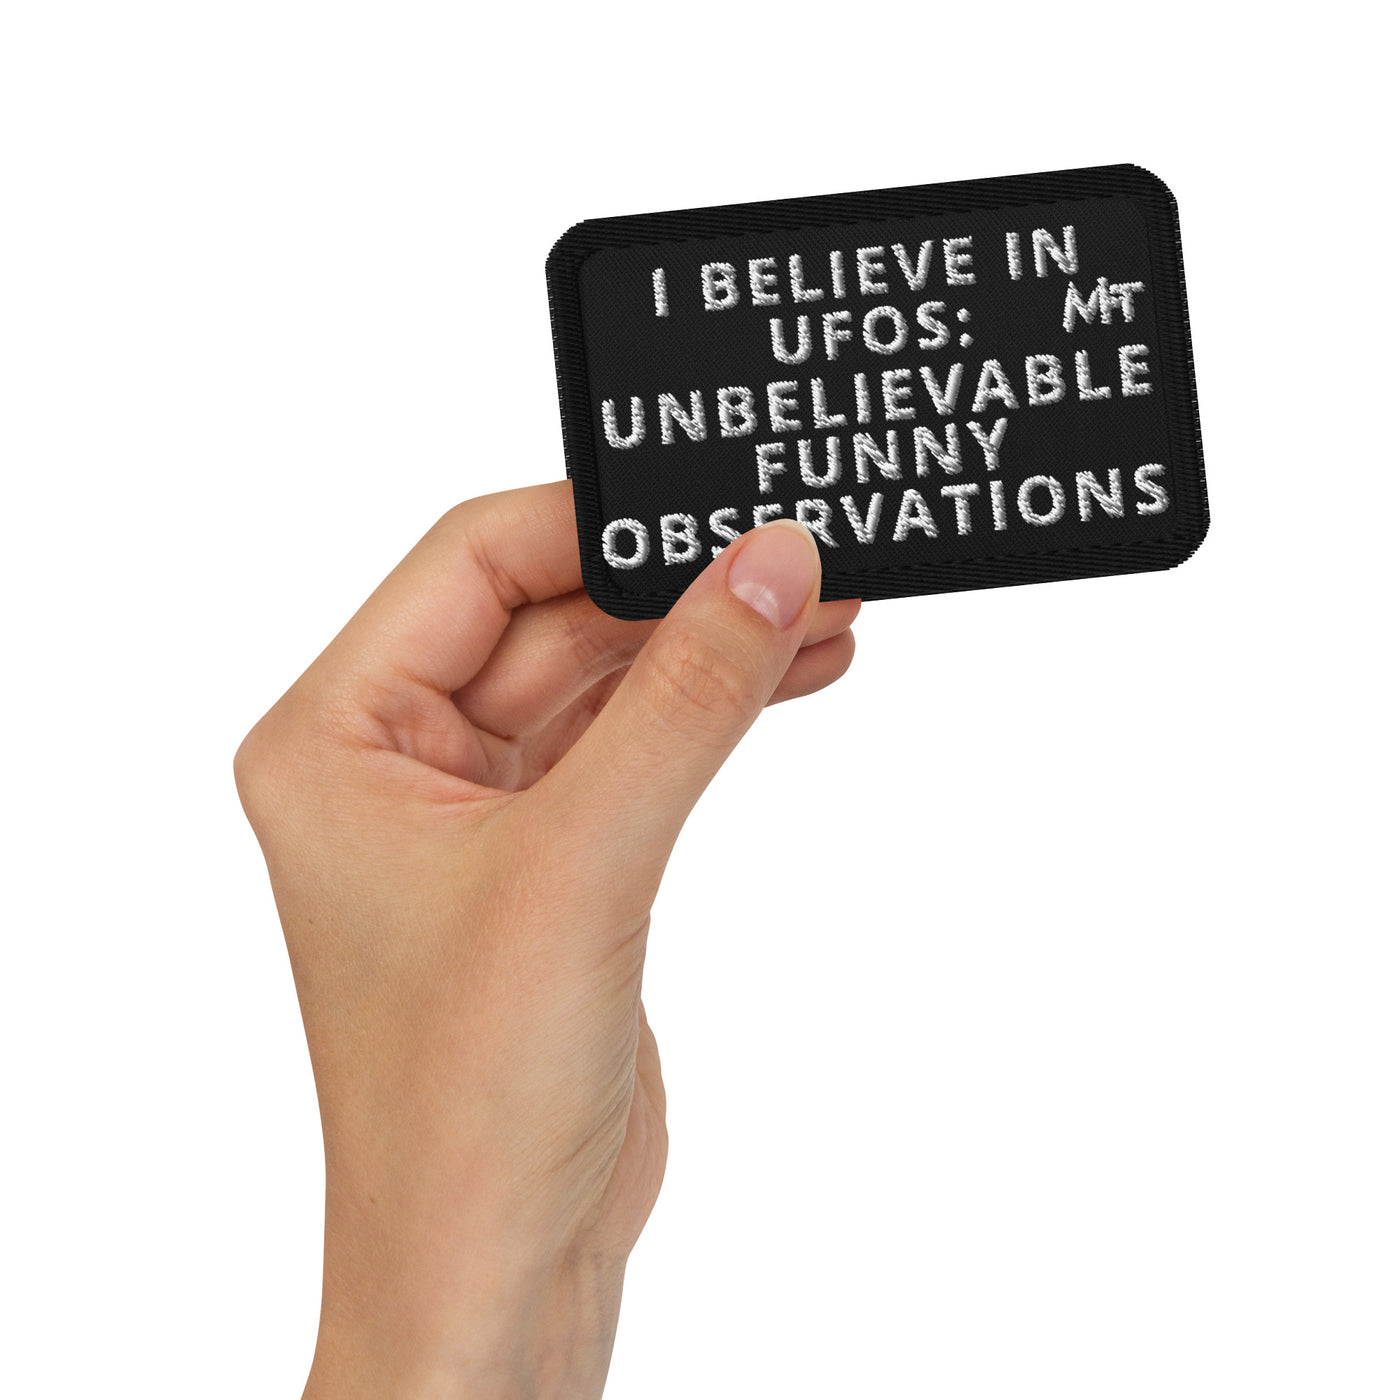 I believe in UFOs: Unbelievably Funny Observations - Embroidered patches